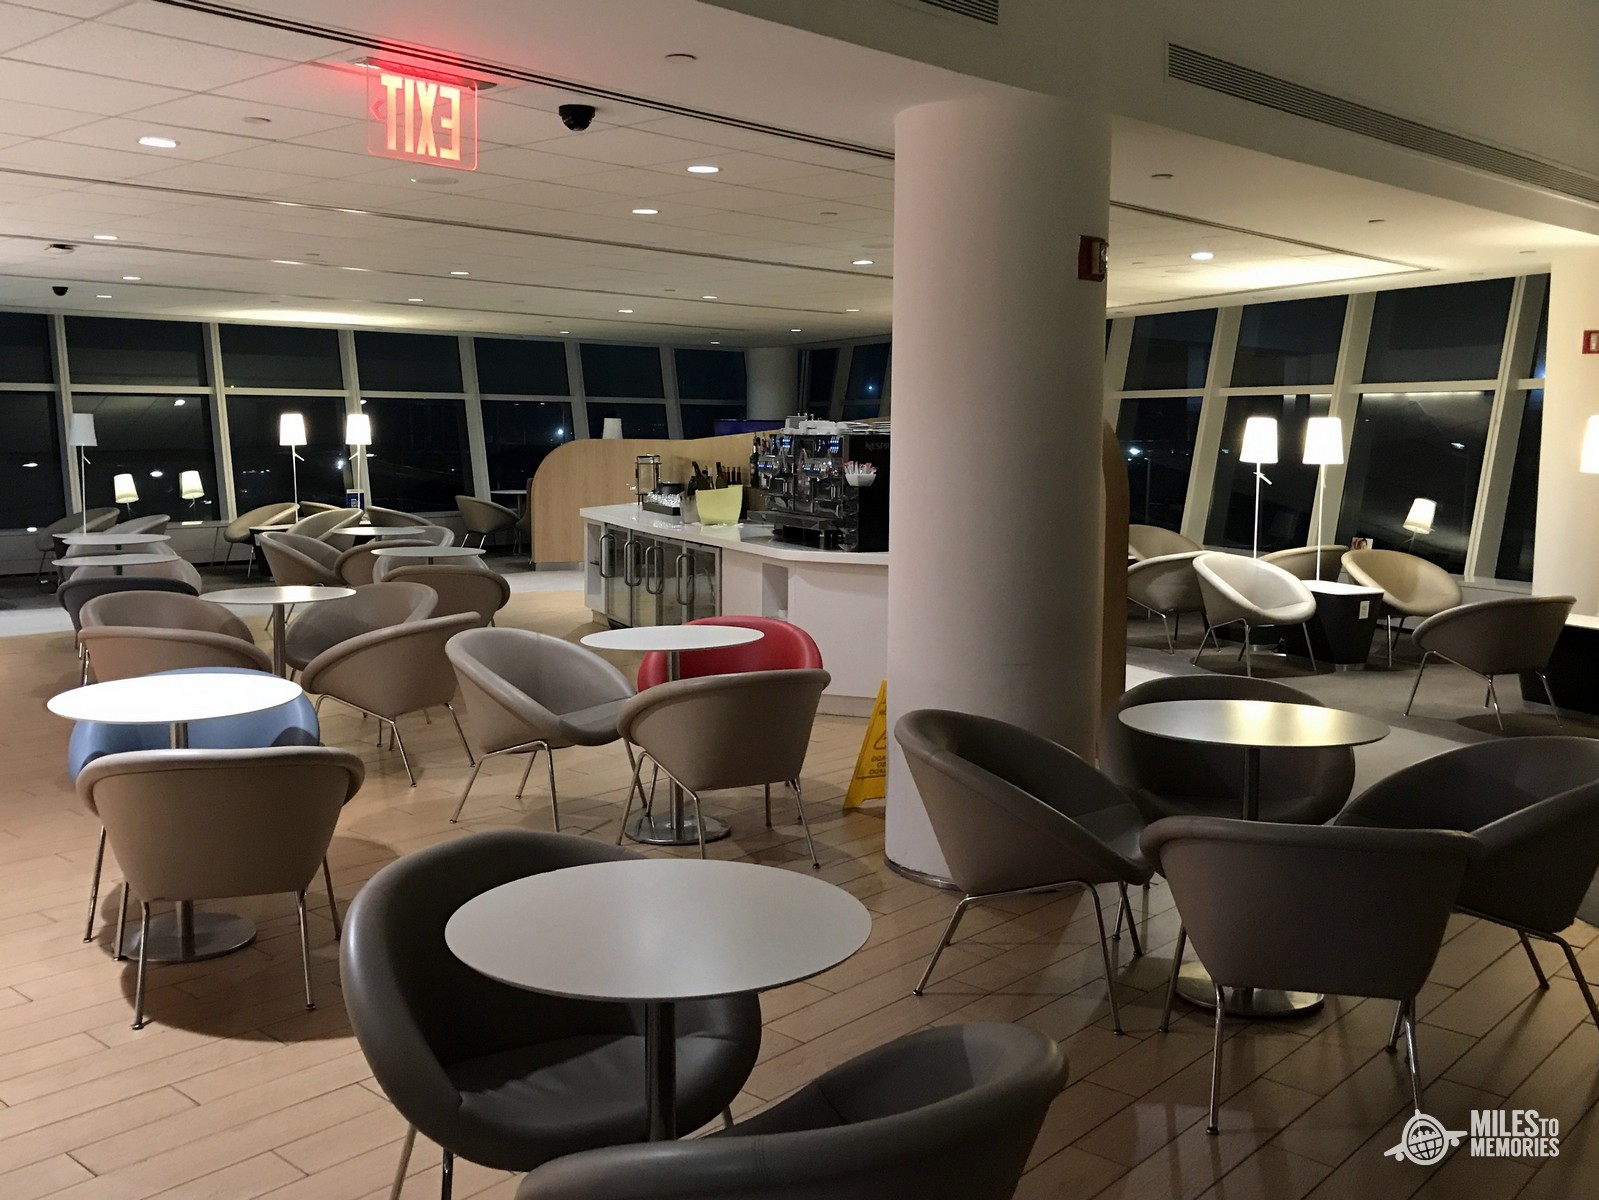 JFK Air France Priority Pass Lounge Access Domestic Flights & Review